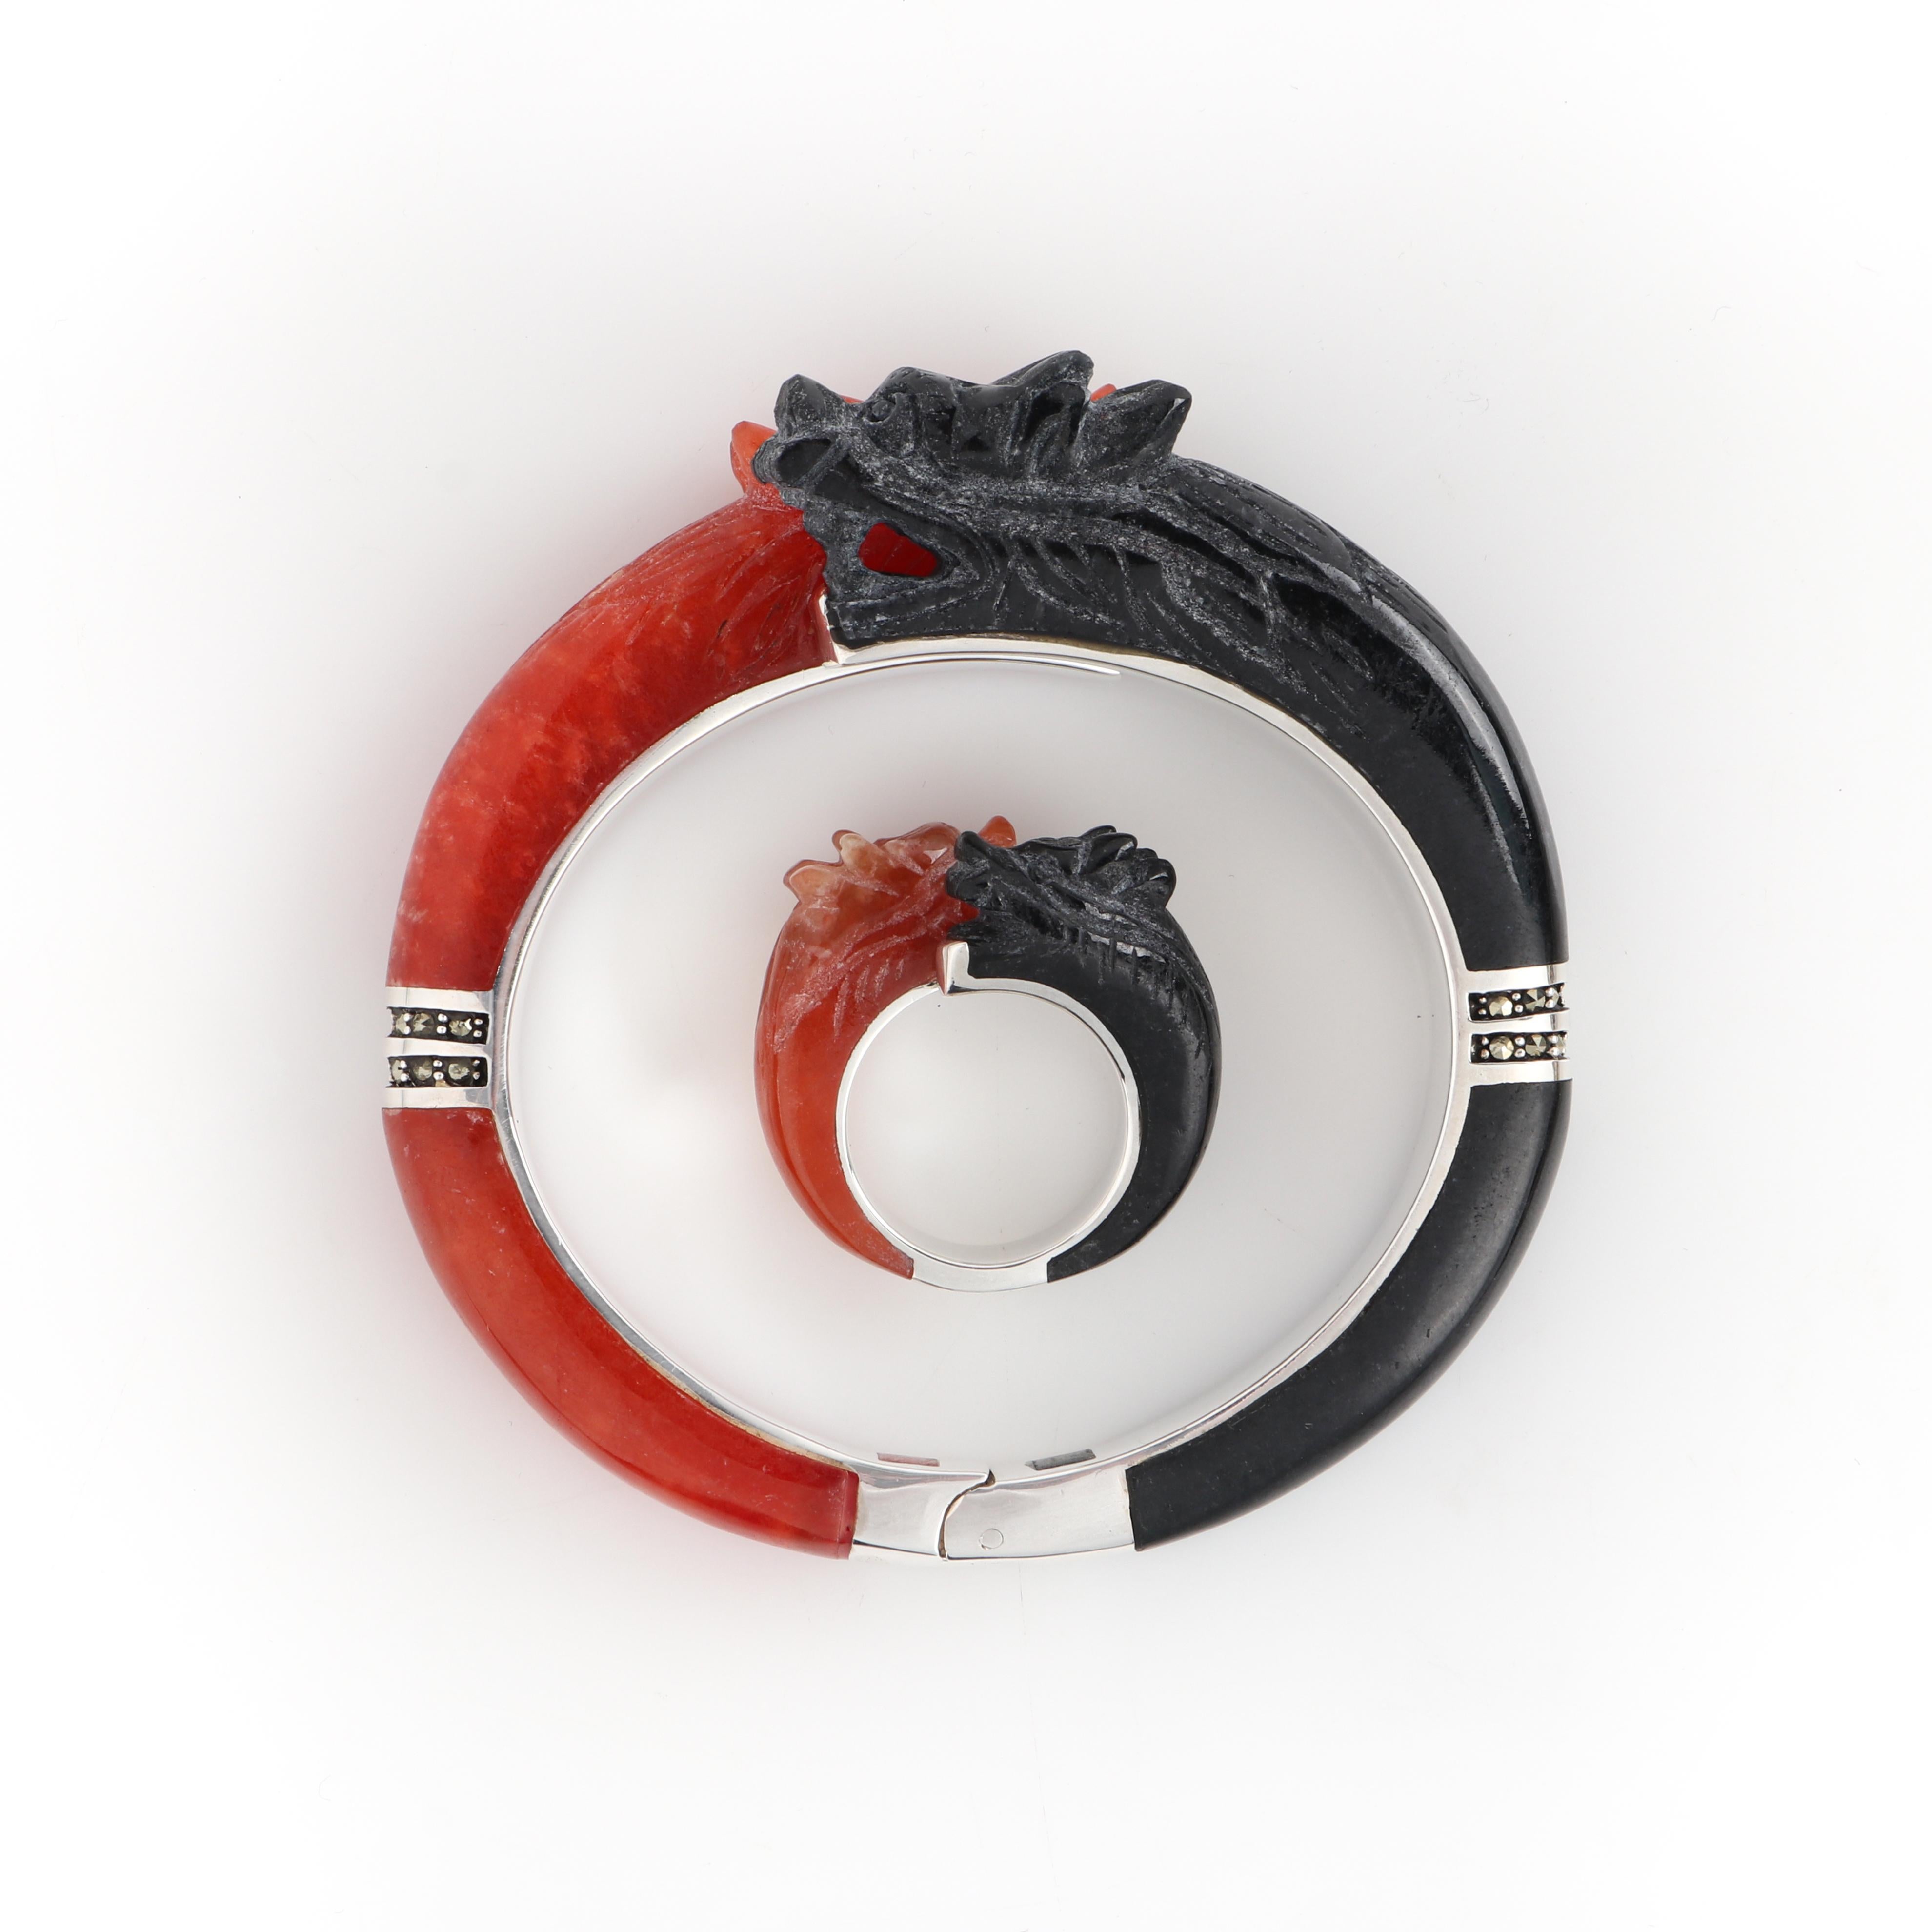 Black & Red Carved Stone Double Dragon Sterling Silver Bangle Bracelet Ring Set
 
Style: Bangle bracelet and ring set
Color(s): Stone: shades of red, black; metal: silver
Marked Material: “925” Silver
Unmarked Material (feel of): Stones: Red